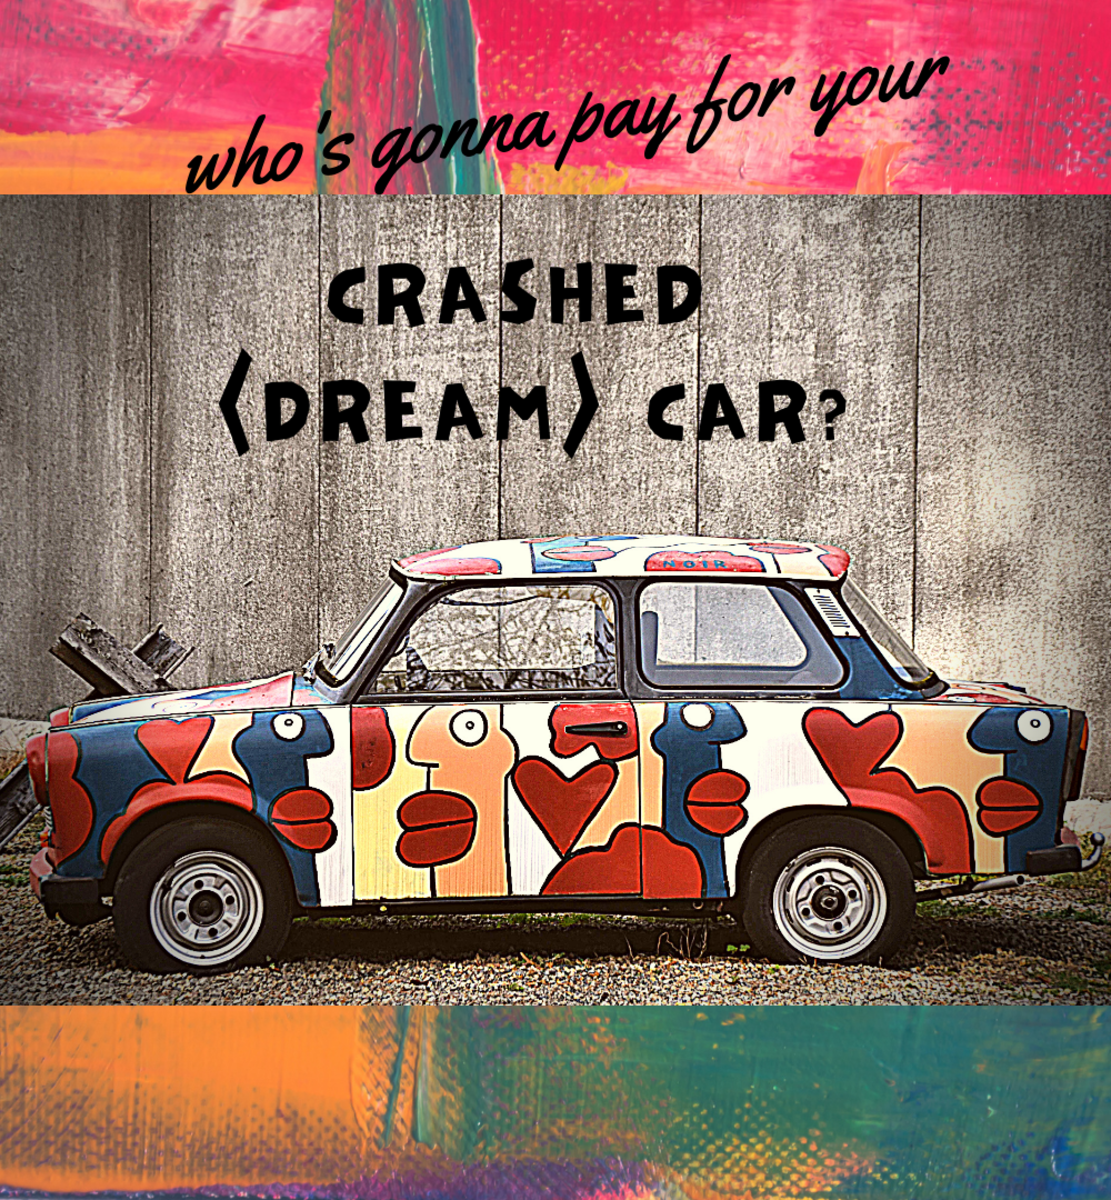 What Do Car Crash Dreams Mean? Interpreting the Meaning of Cars in Dreams